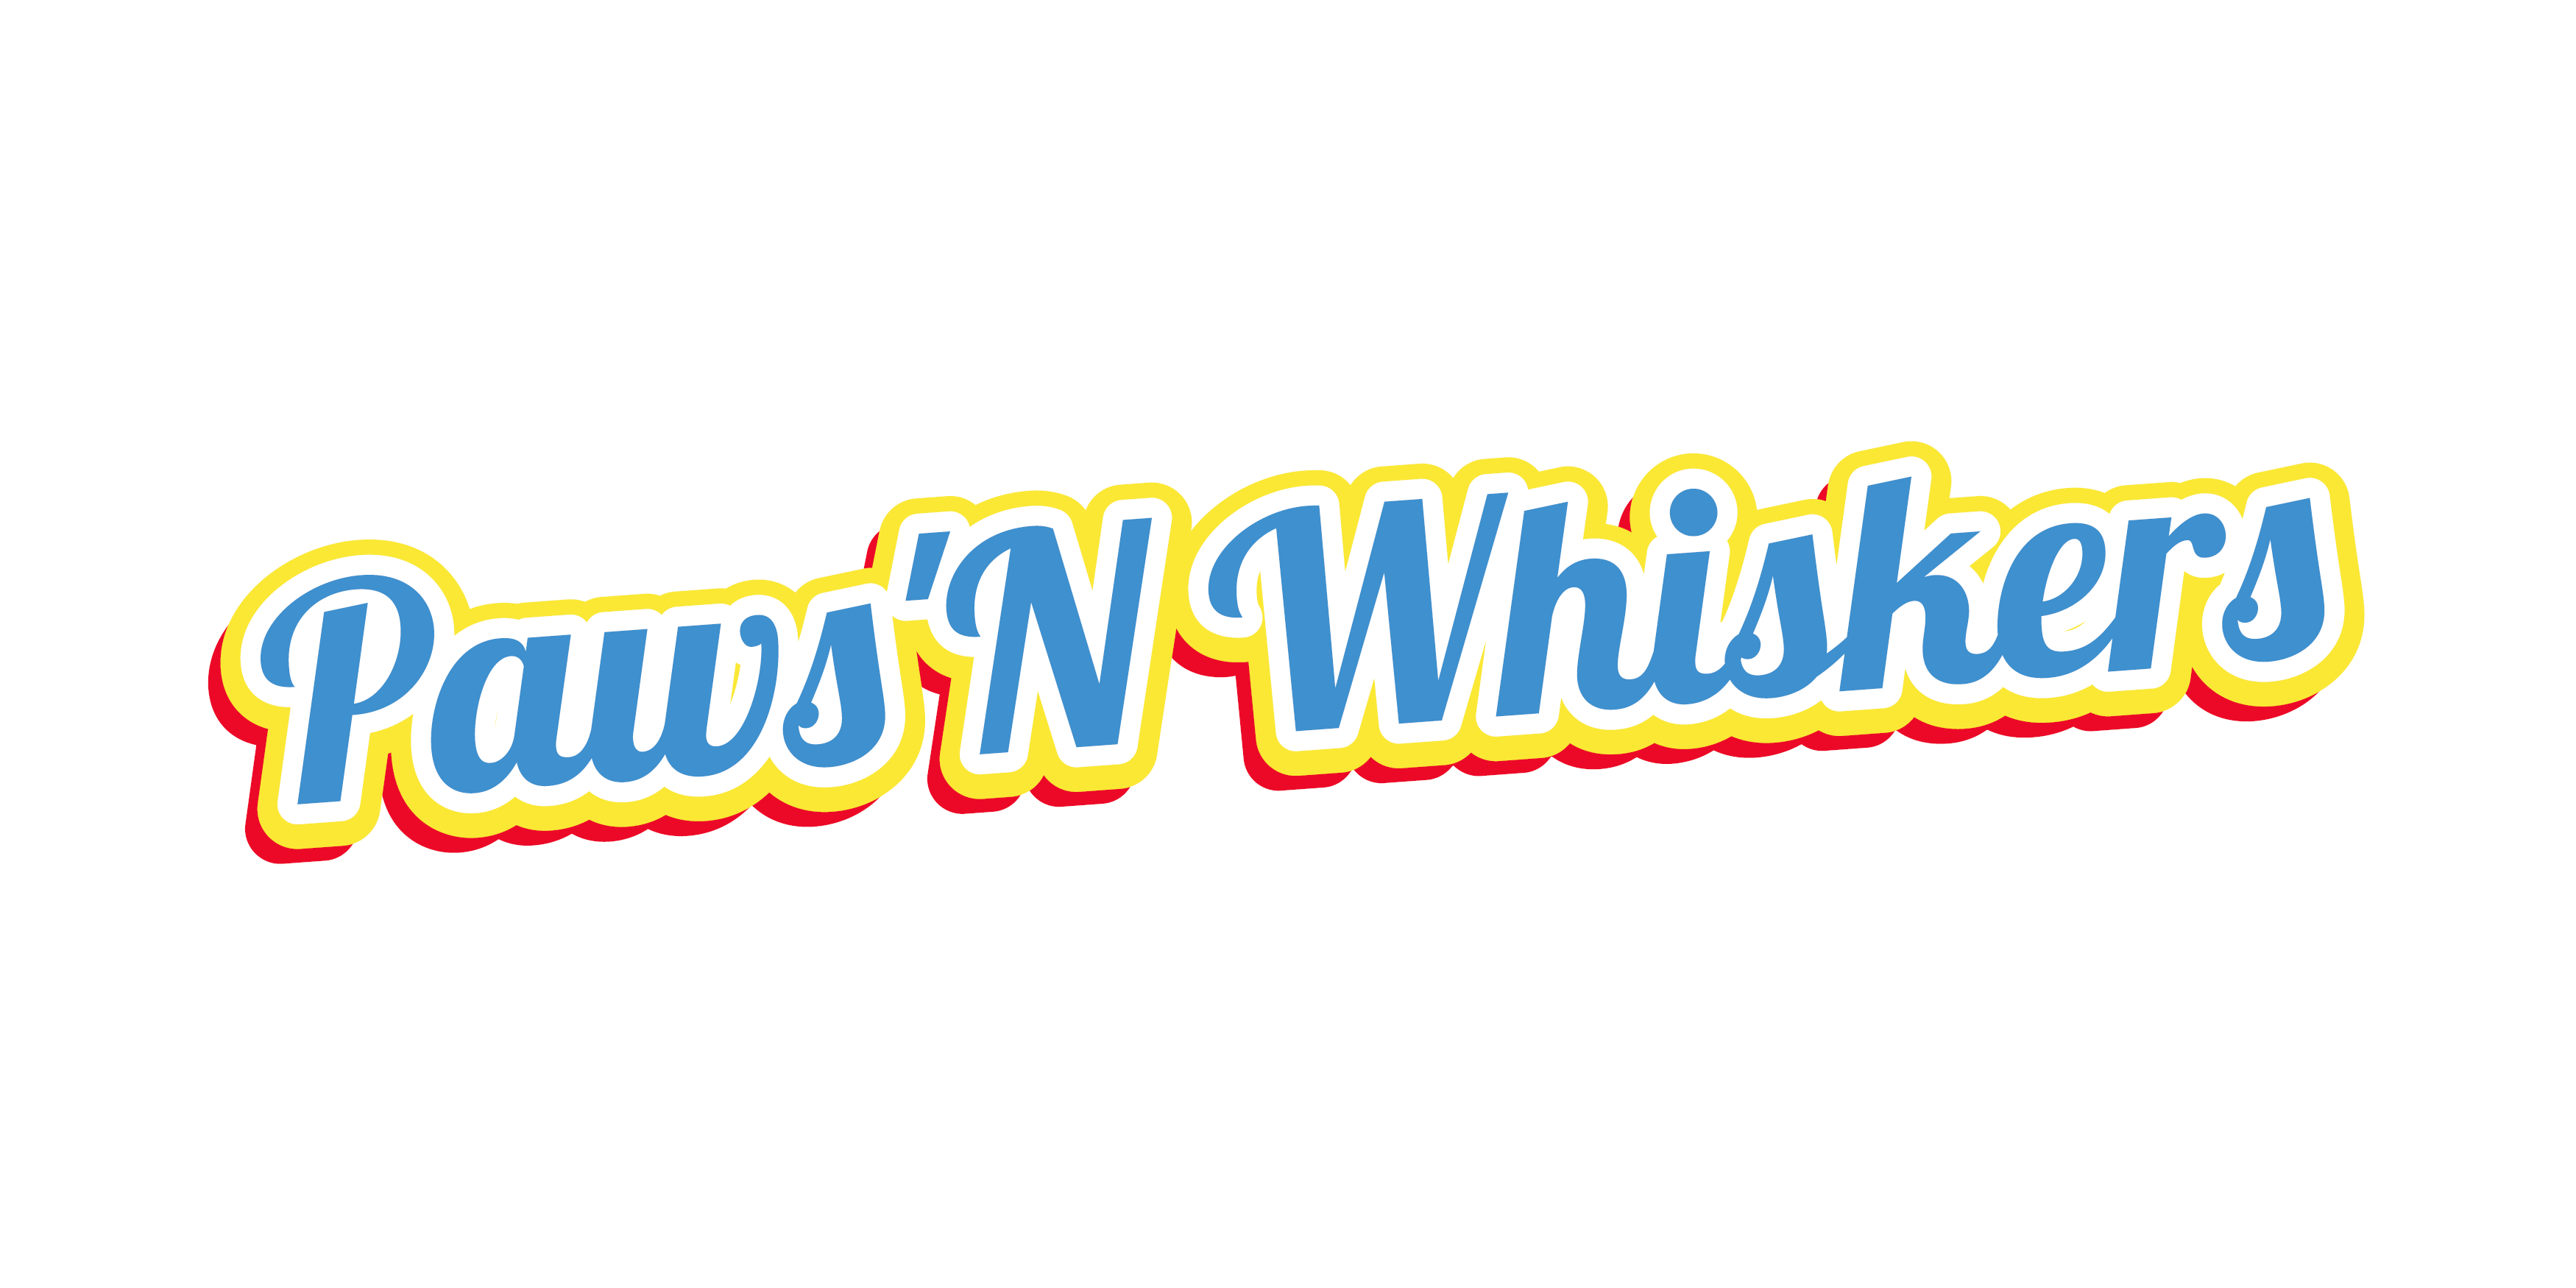 pawsn-whiskers-logo-summary-image.png